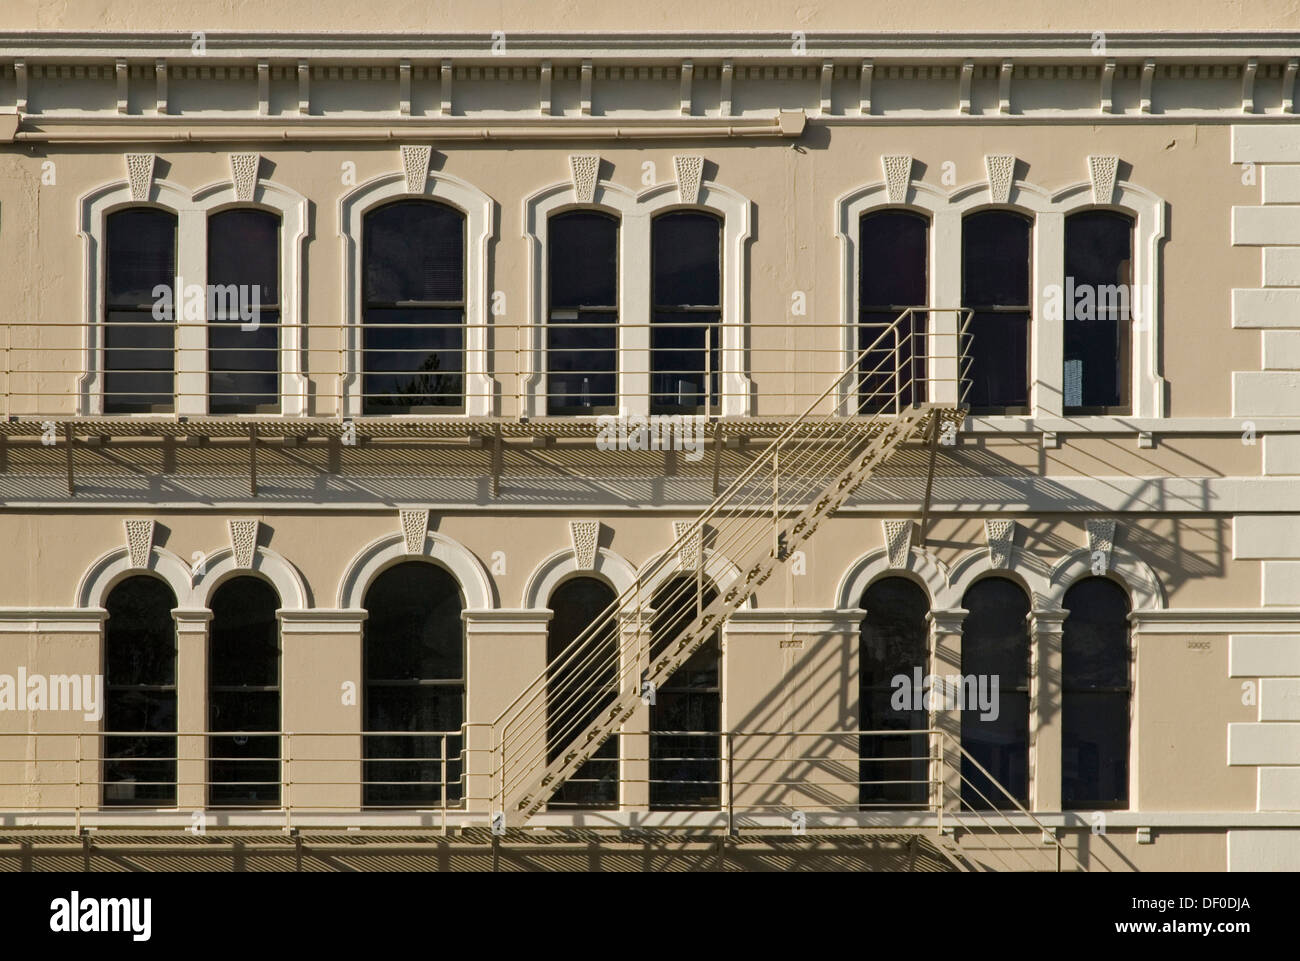 A fire ladder on a typical Victorian facade in downtown Dunedin, South Island, New Zealand Stock Photo